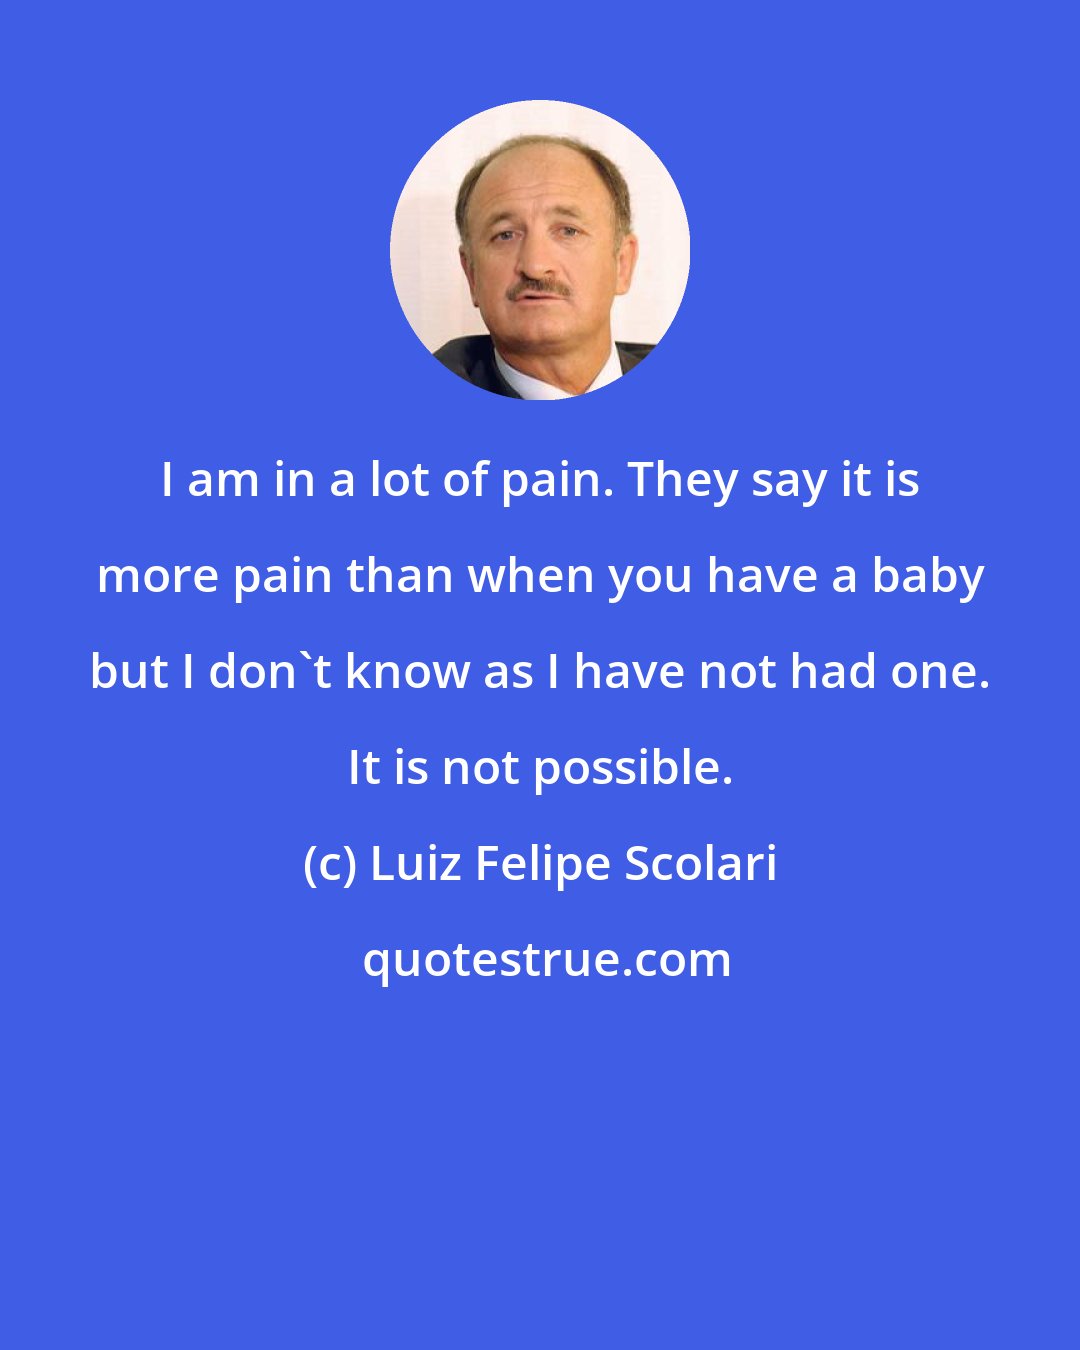 Luiz Felipe Scolari: I am in a lot of pain. They say it is more pain than when you have a baby but I don't know as I have not had one. It is not possible.